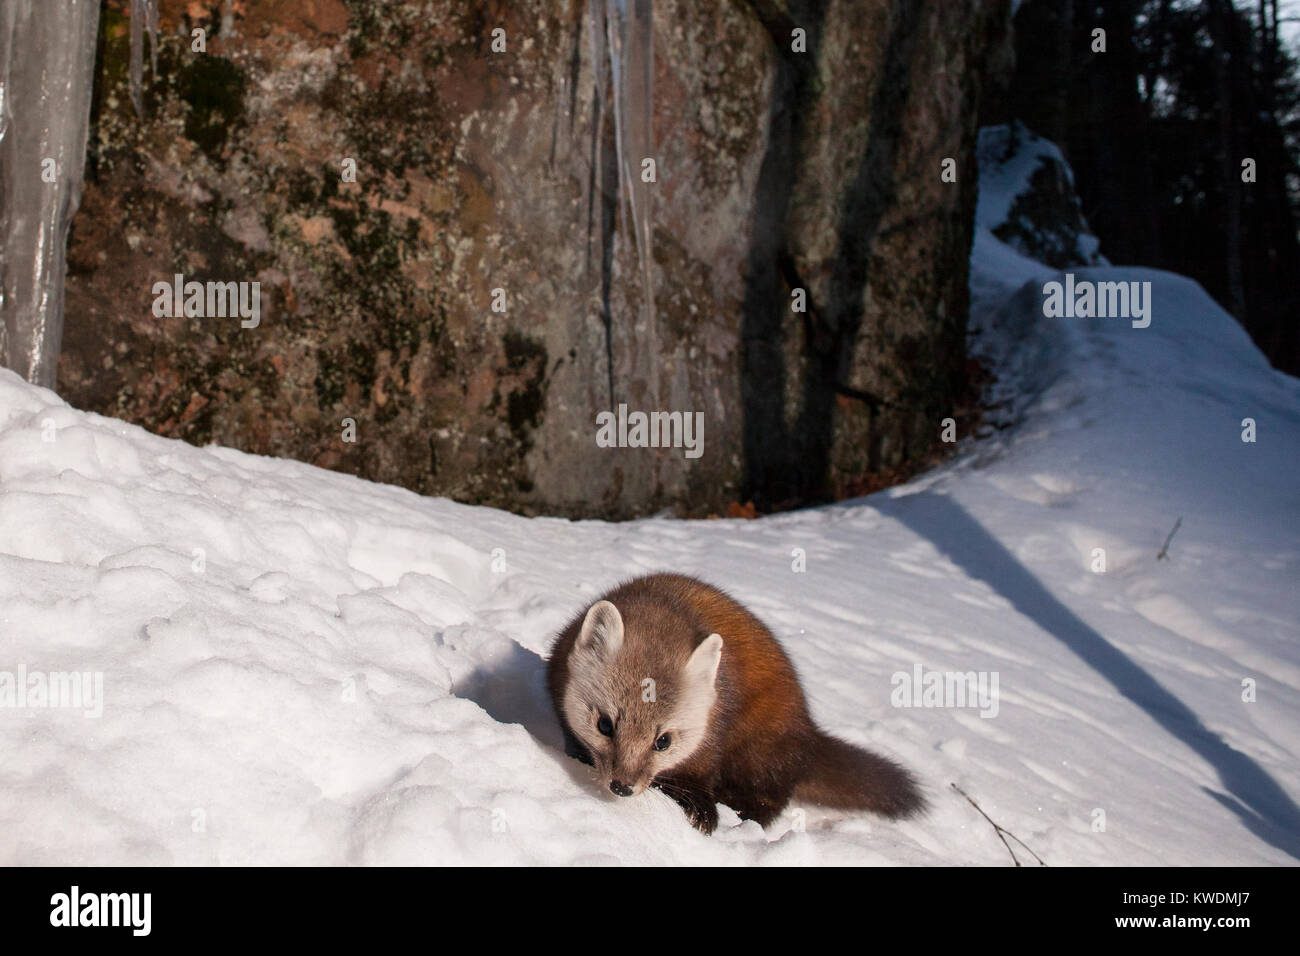 MAYNOOTH, ONTARIO, CANADA - December 21, 2017: A marten (Martes americana), part of the Weasel family / Mustelidae forages for food. Stock Photo